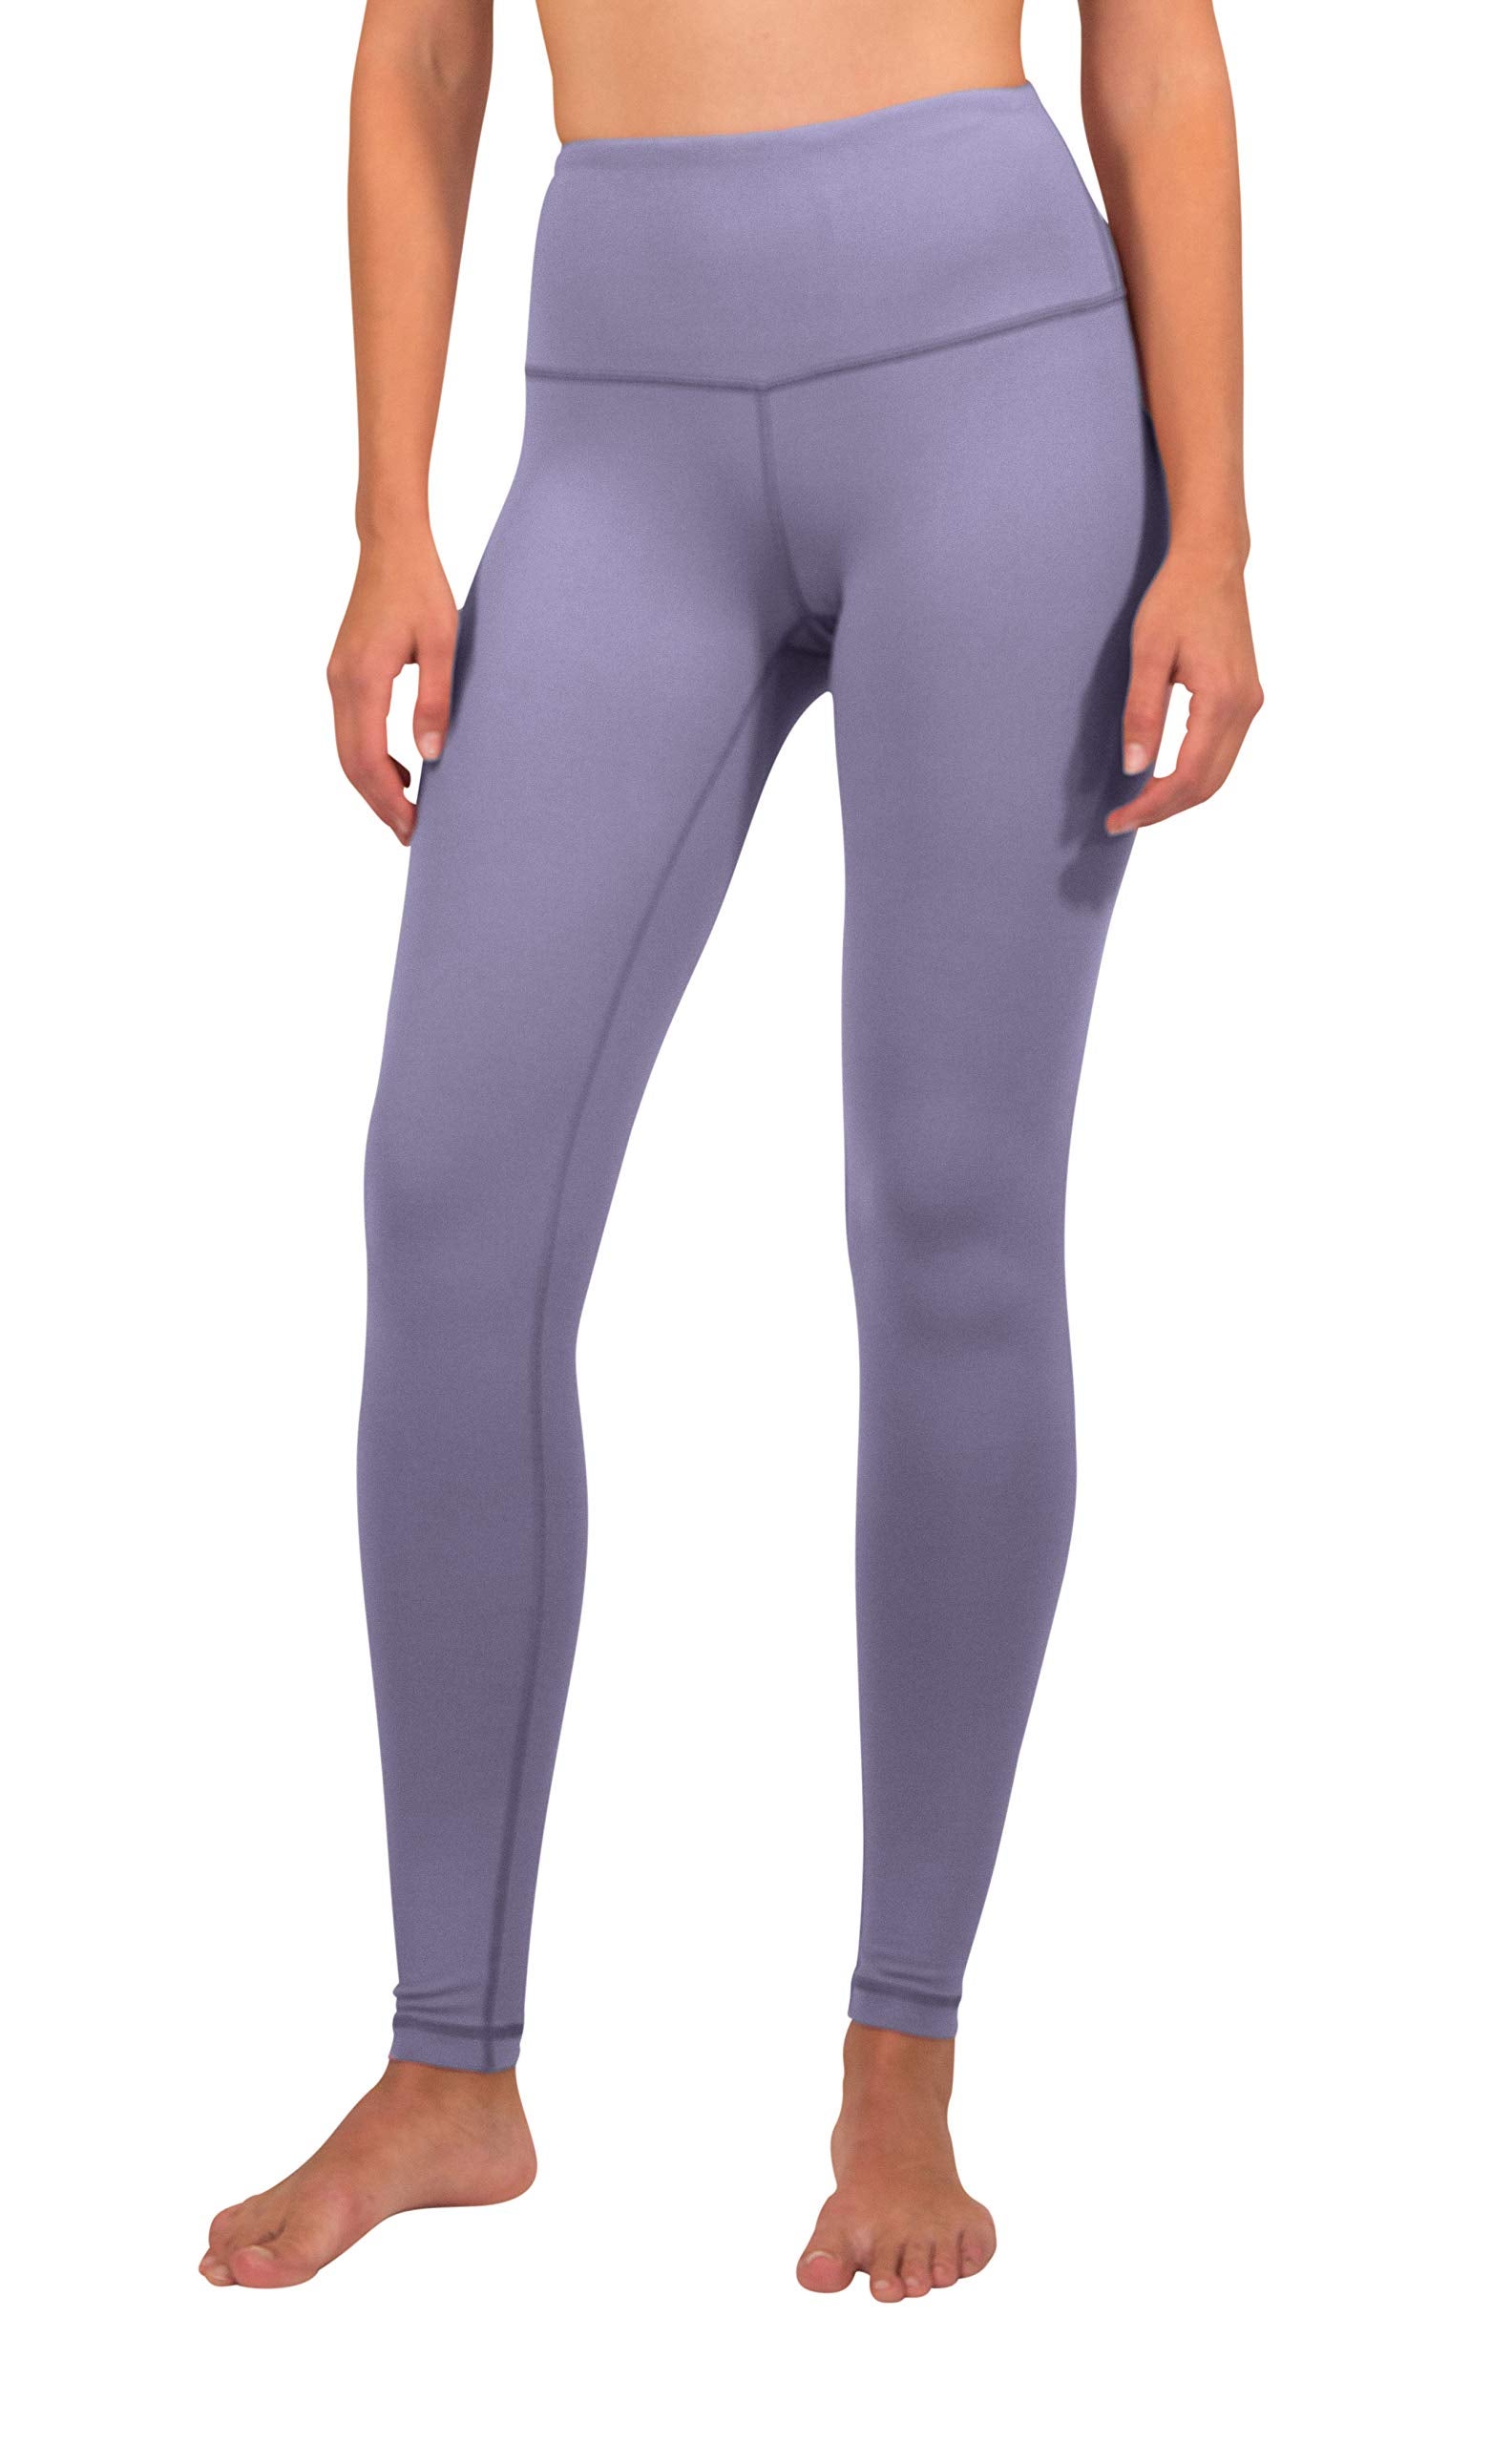 Cheap Workout Leggings That Are The 